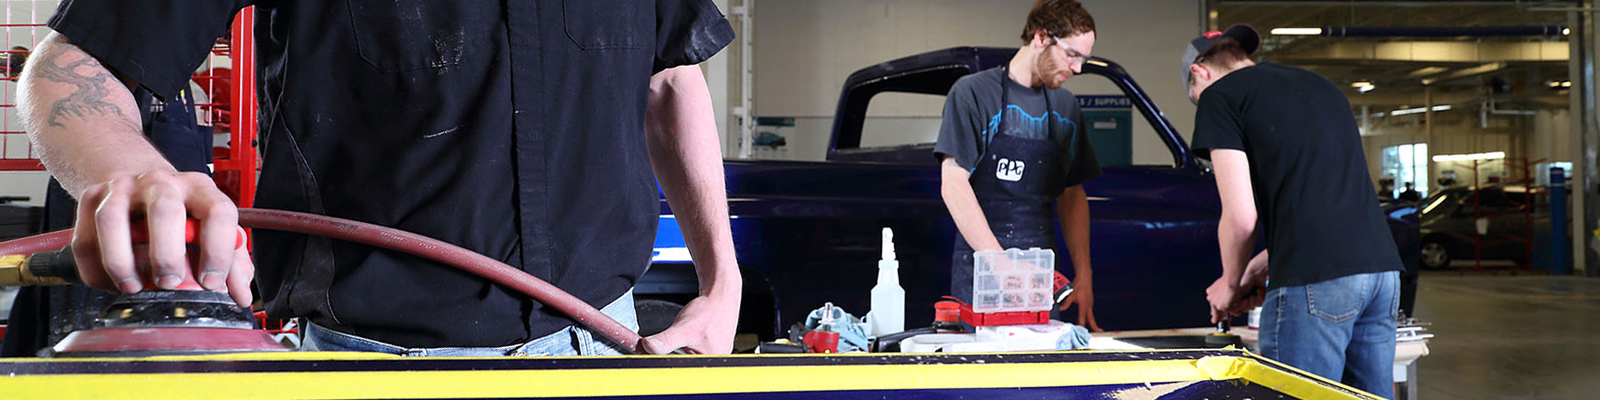 Student in shop shirt buffing tailgate in collision lab, others working in background